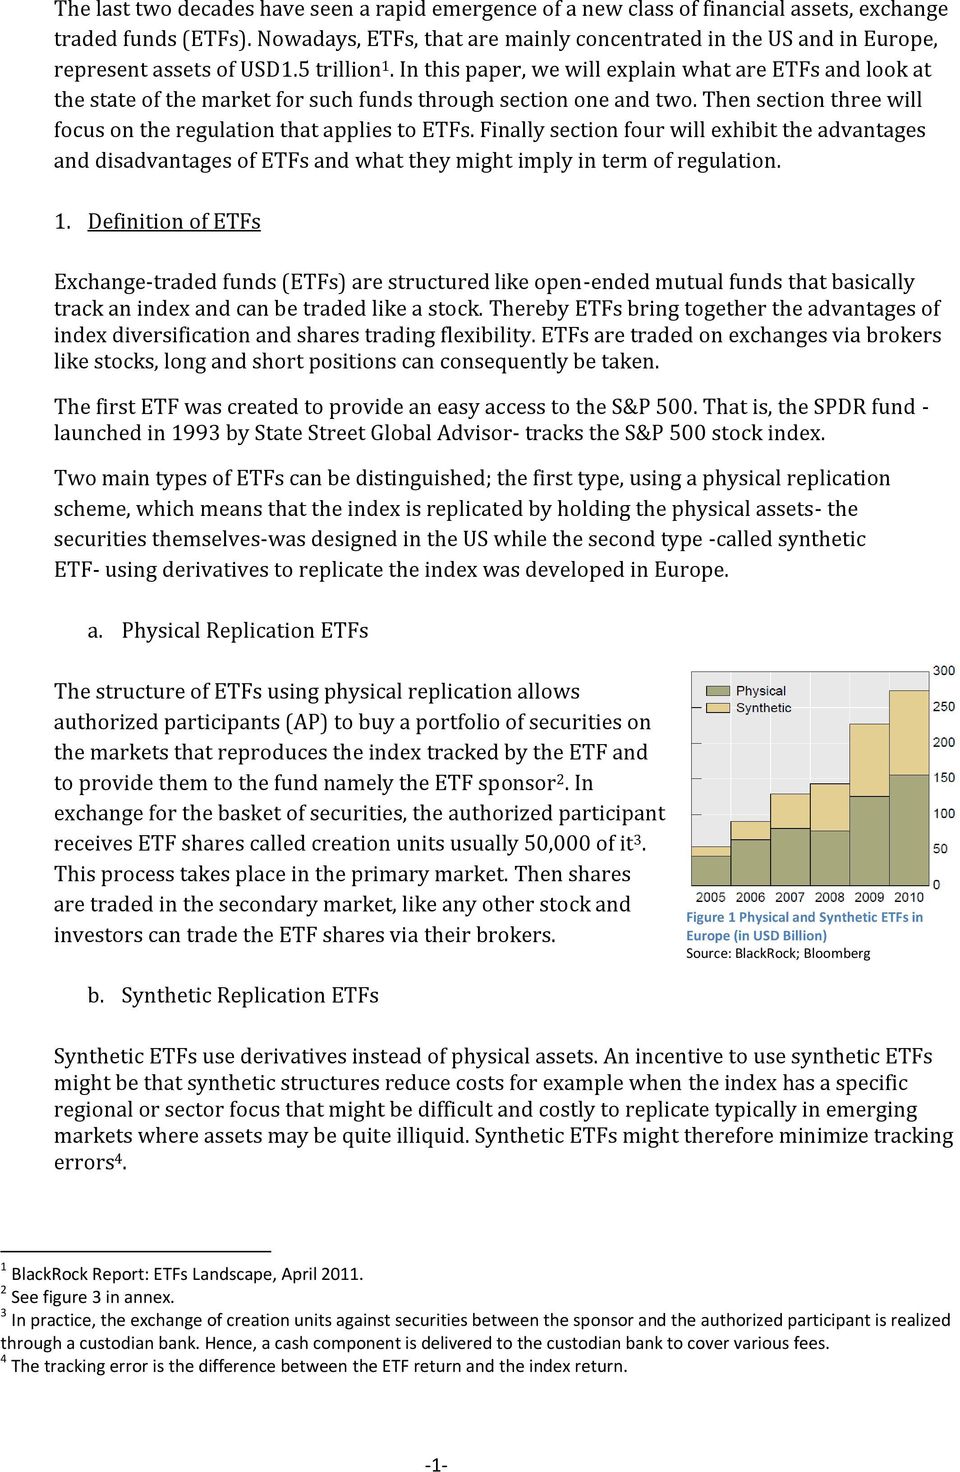 In this paper, we will explain what are ETFs and look at the state of the market for such funds through section one and two. Then section three will focus on the regulation that applies to ETFs.